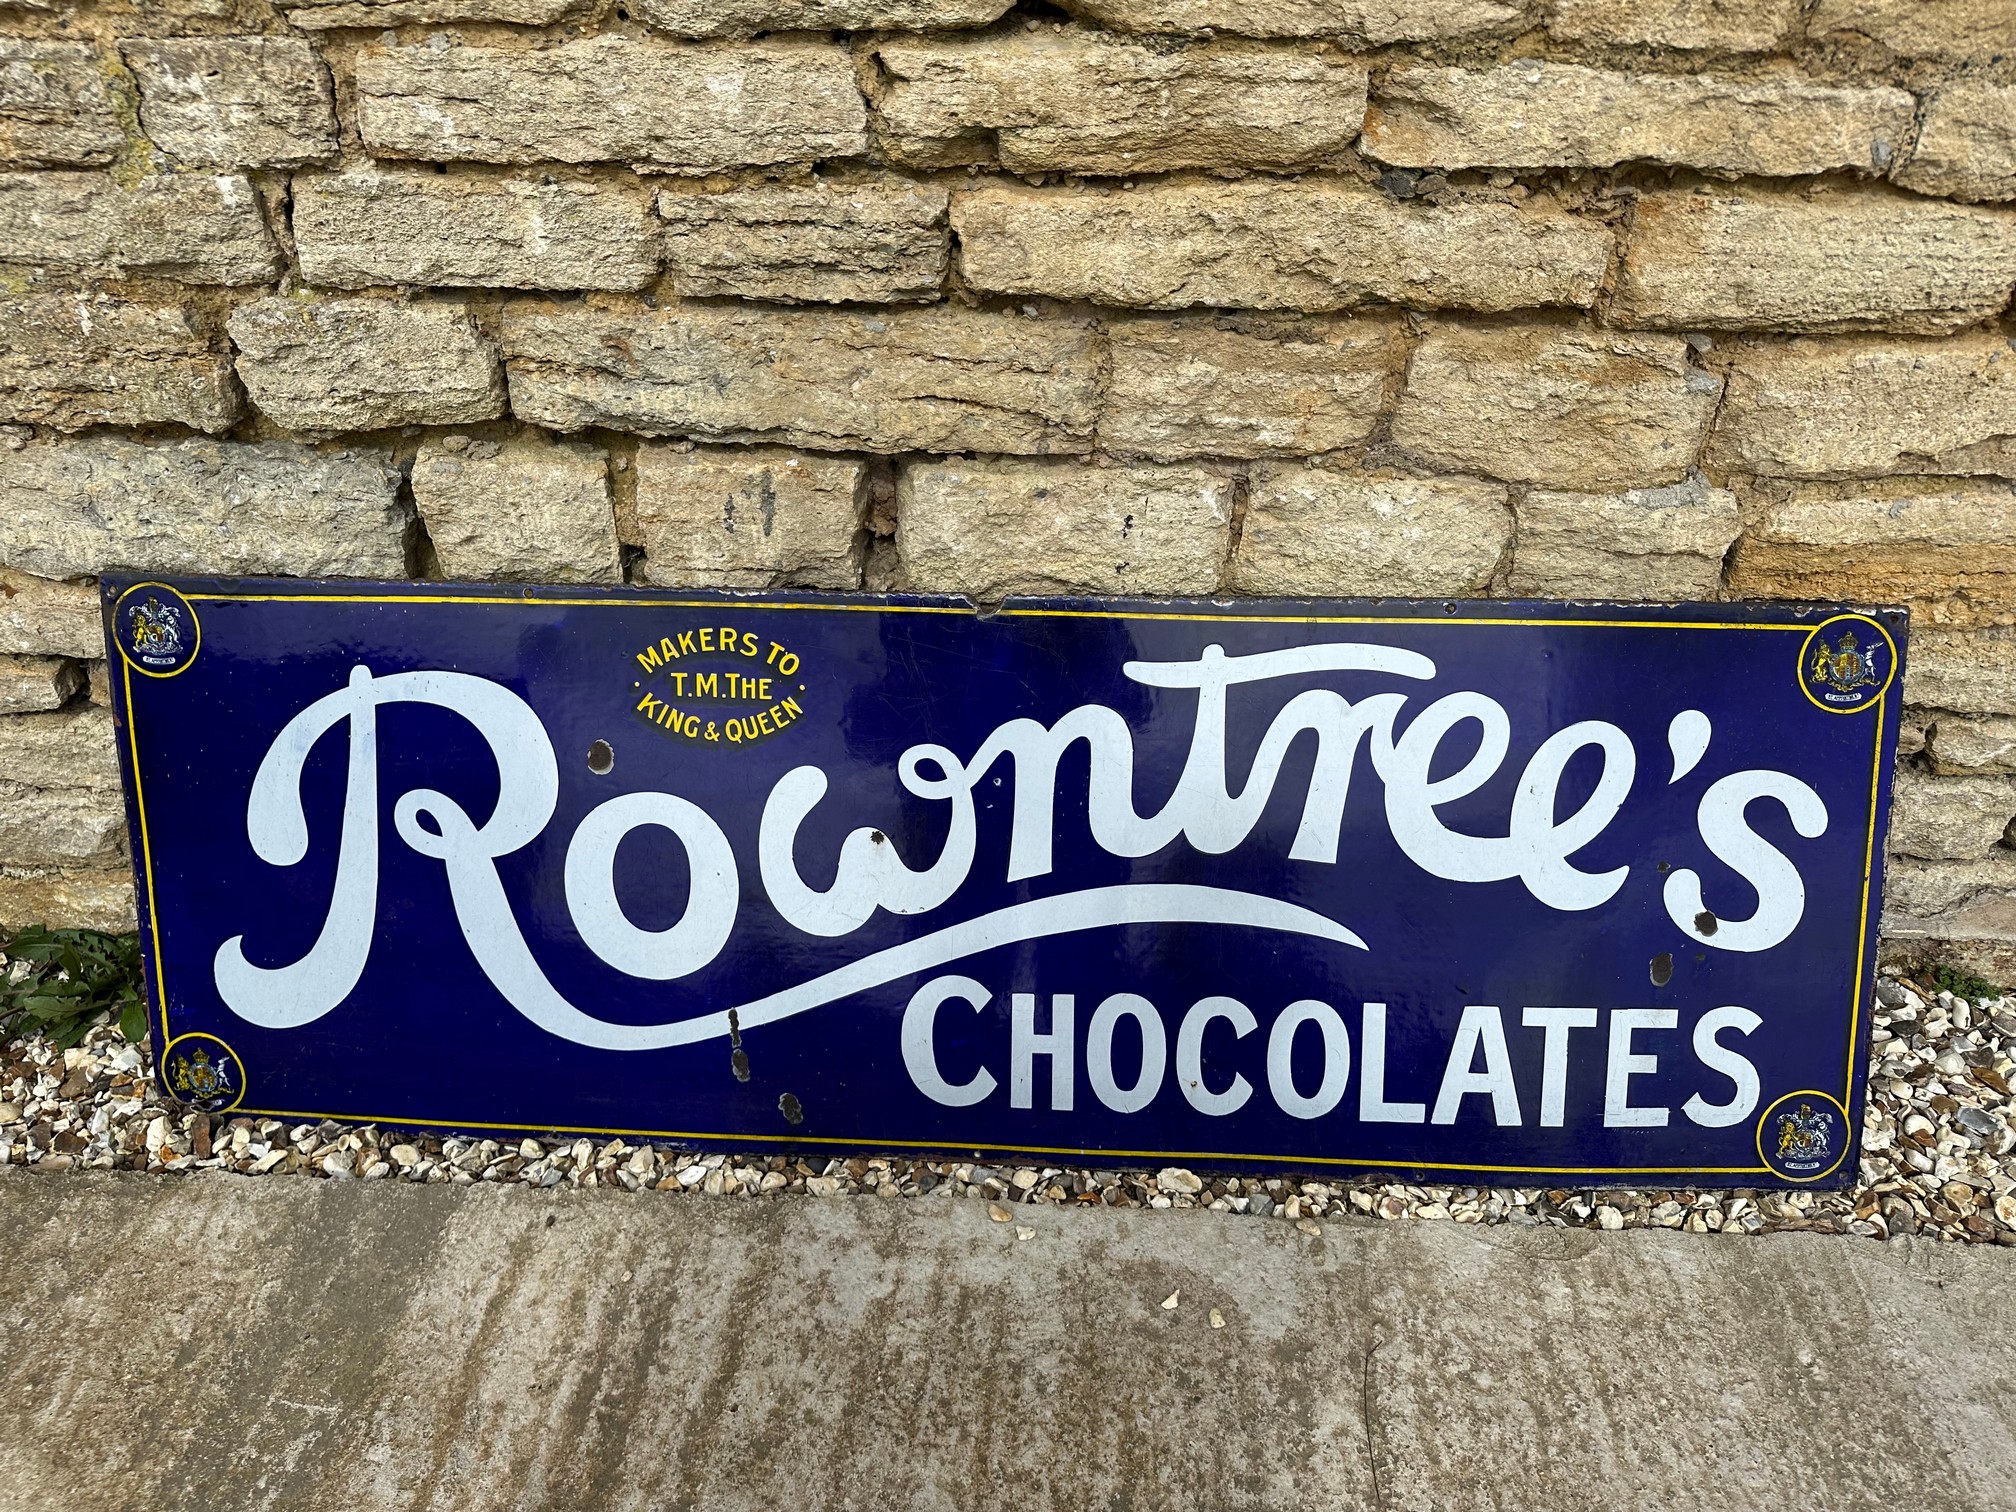 A Rowntree's Chocolates enamel advertising sign with Royal Warrants for "The King and Queen", 60 1/4